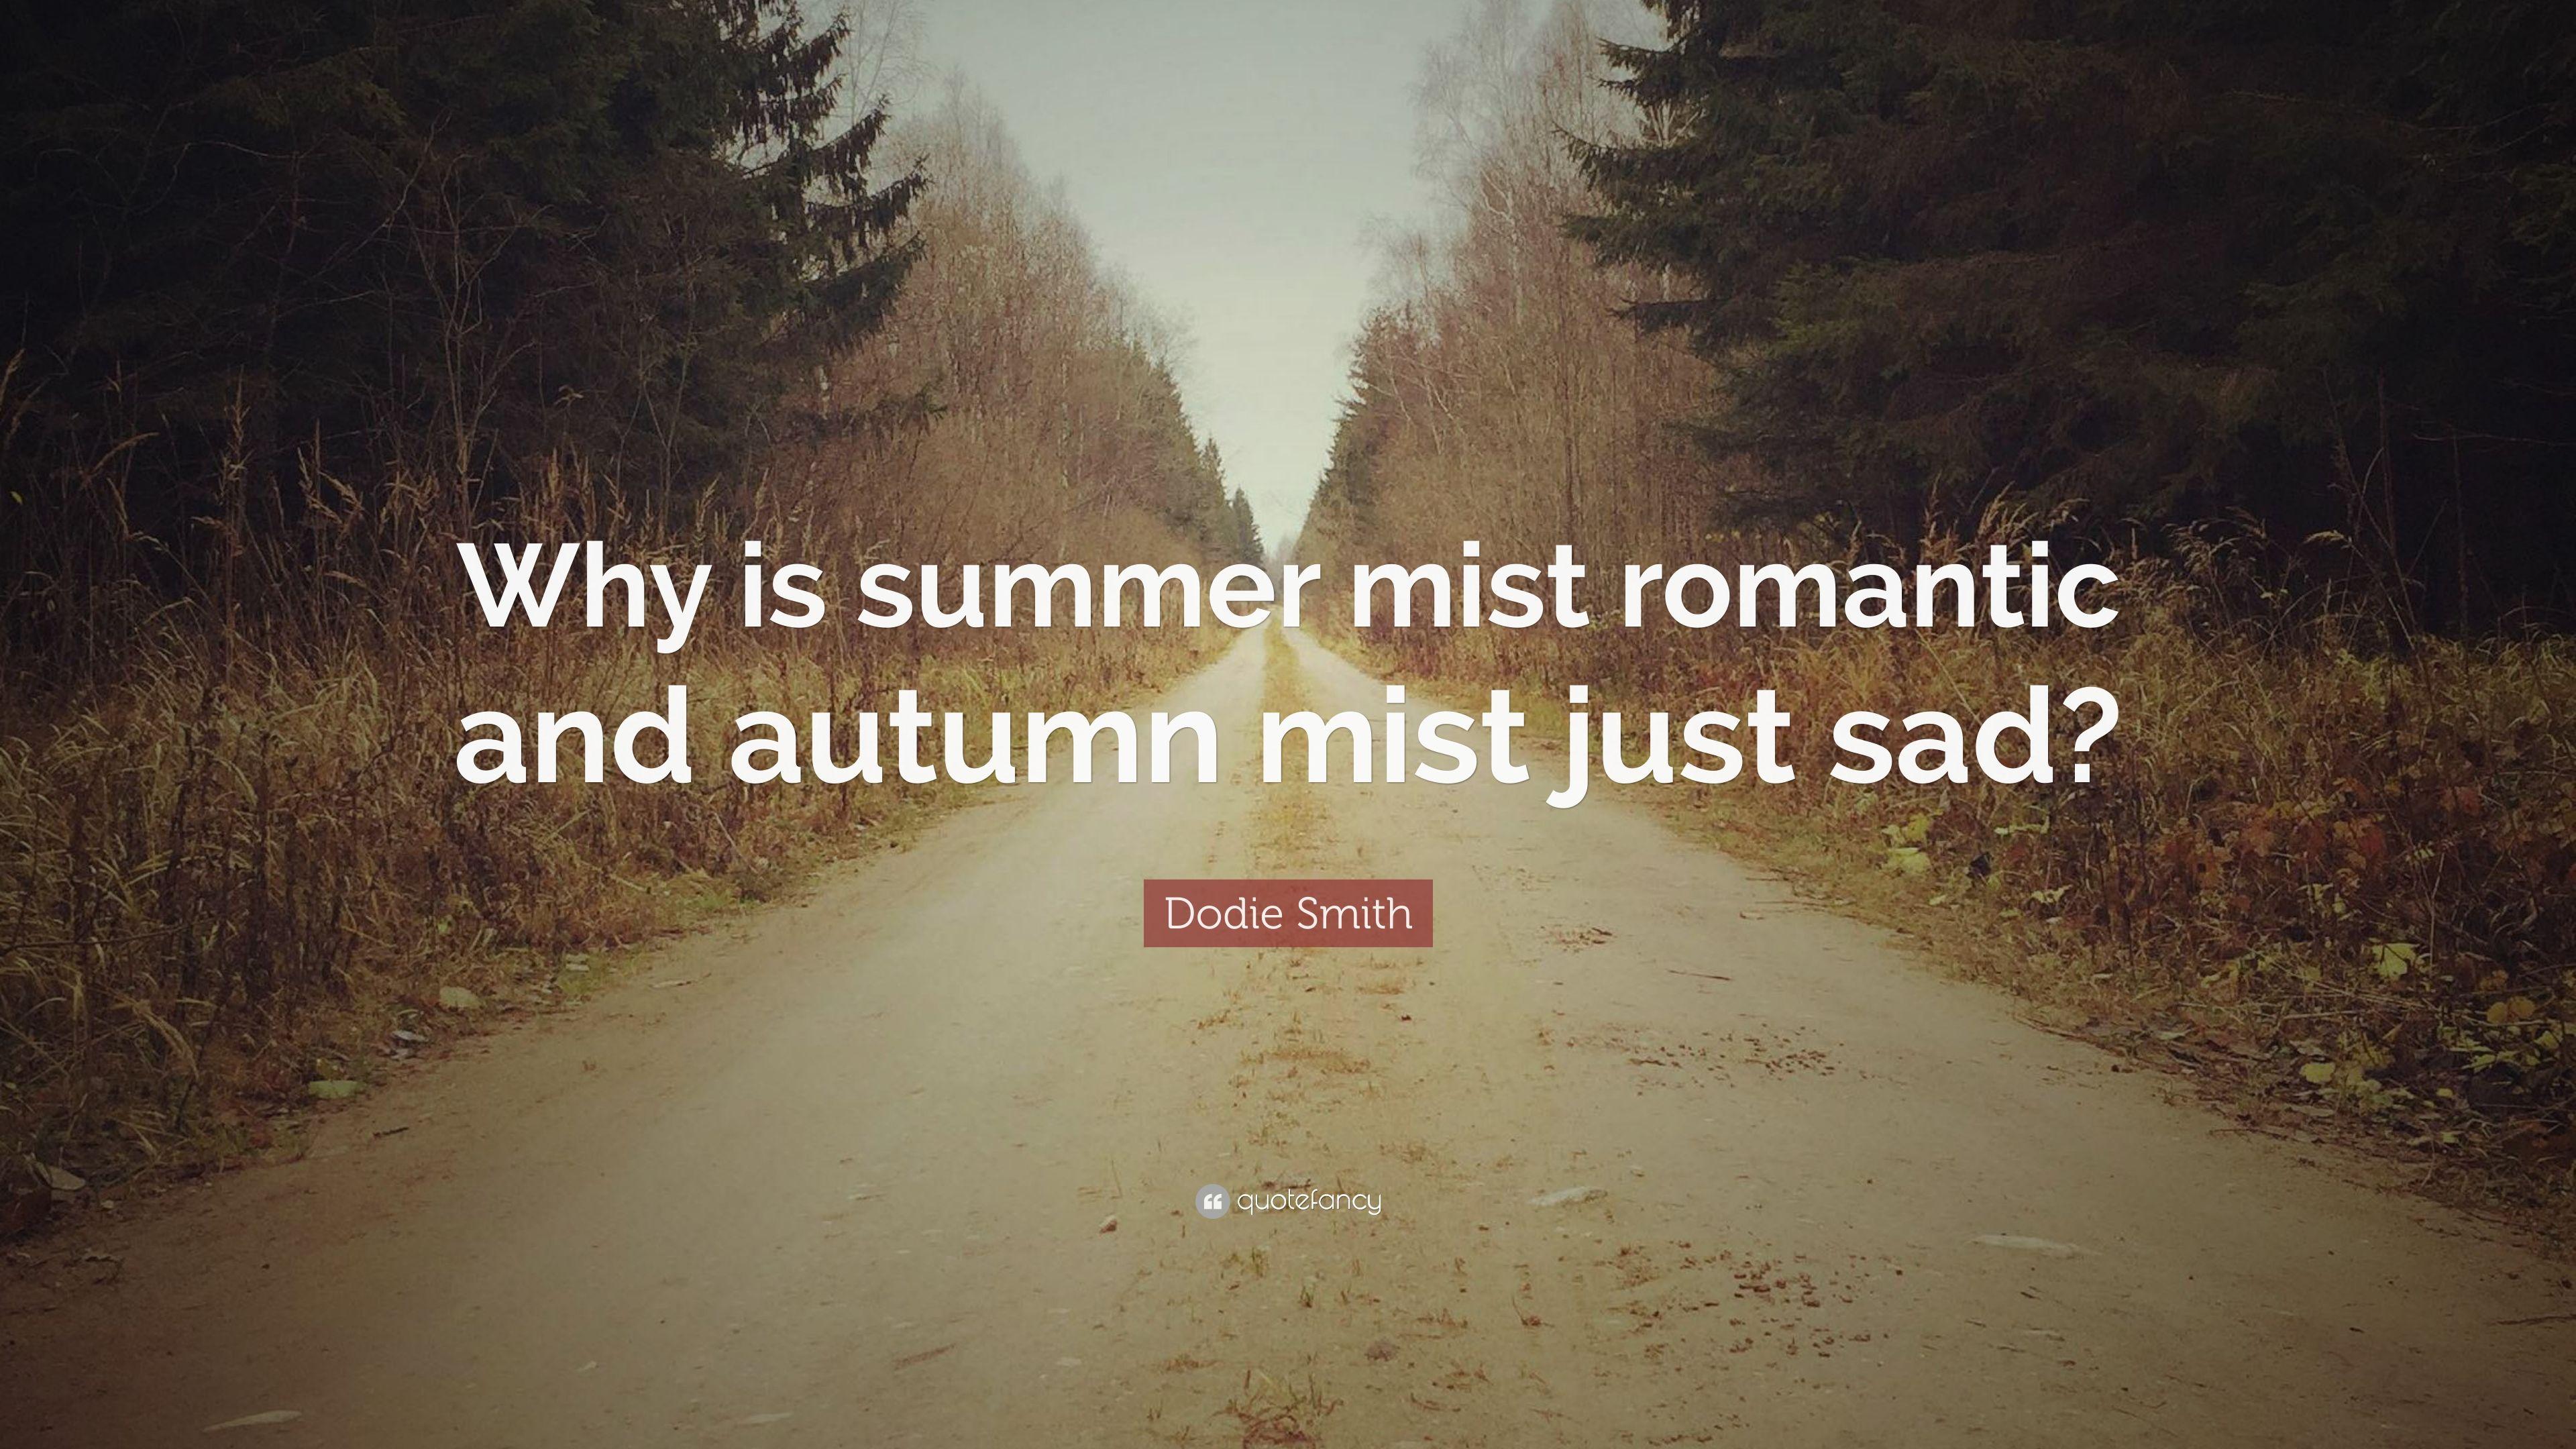 Dodie Smith Quote: “Why is summer mist romantic and autumn